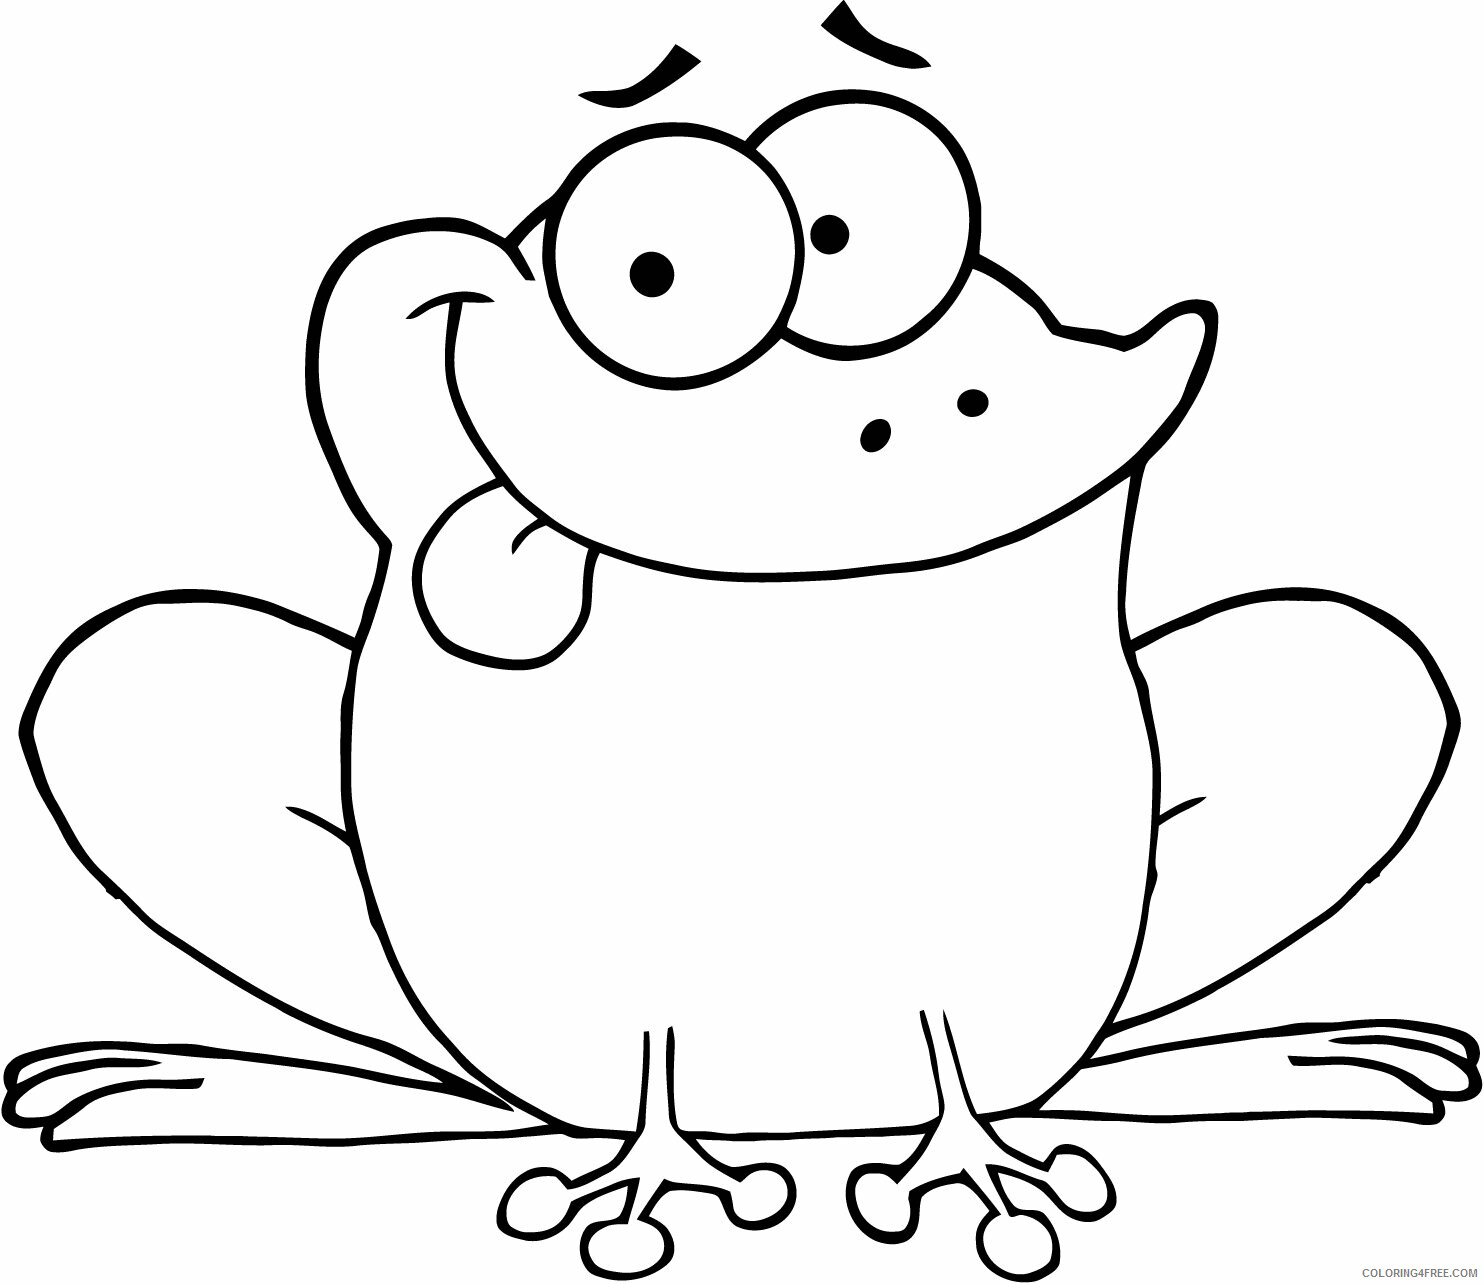 Frog Coloring Pages Animal Printable Sheets Frog Pictures Free 2021 2315 Coloring4free